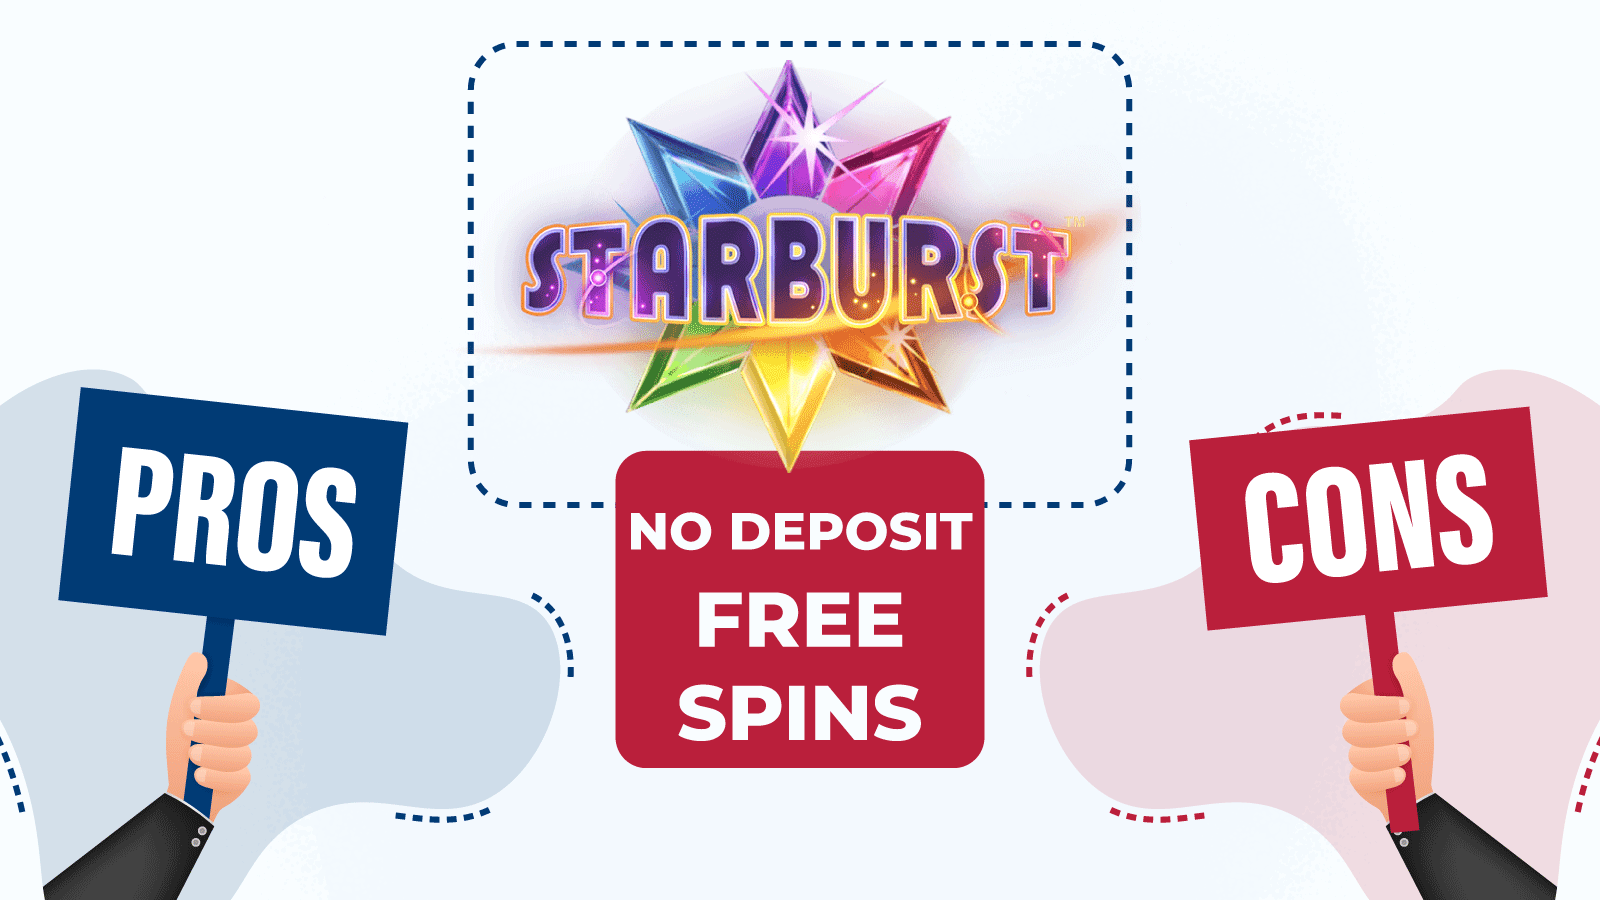 Starburst no deposit free spins Pros and Cons